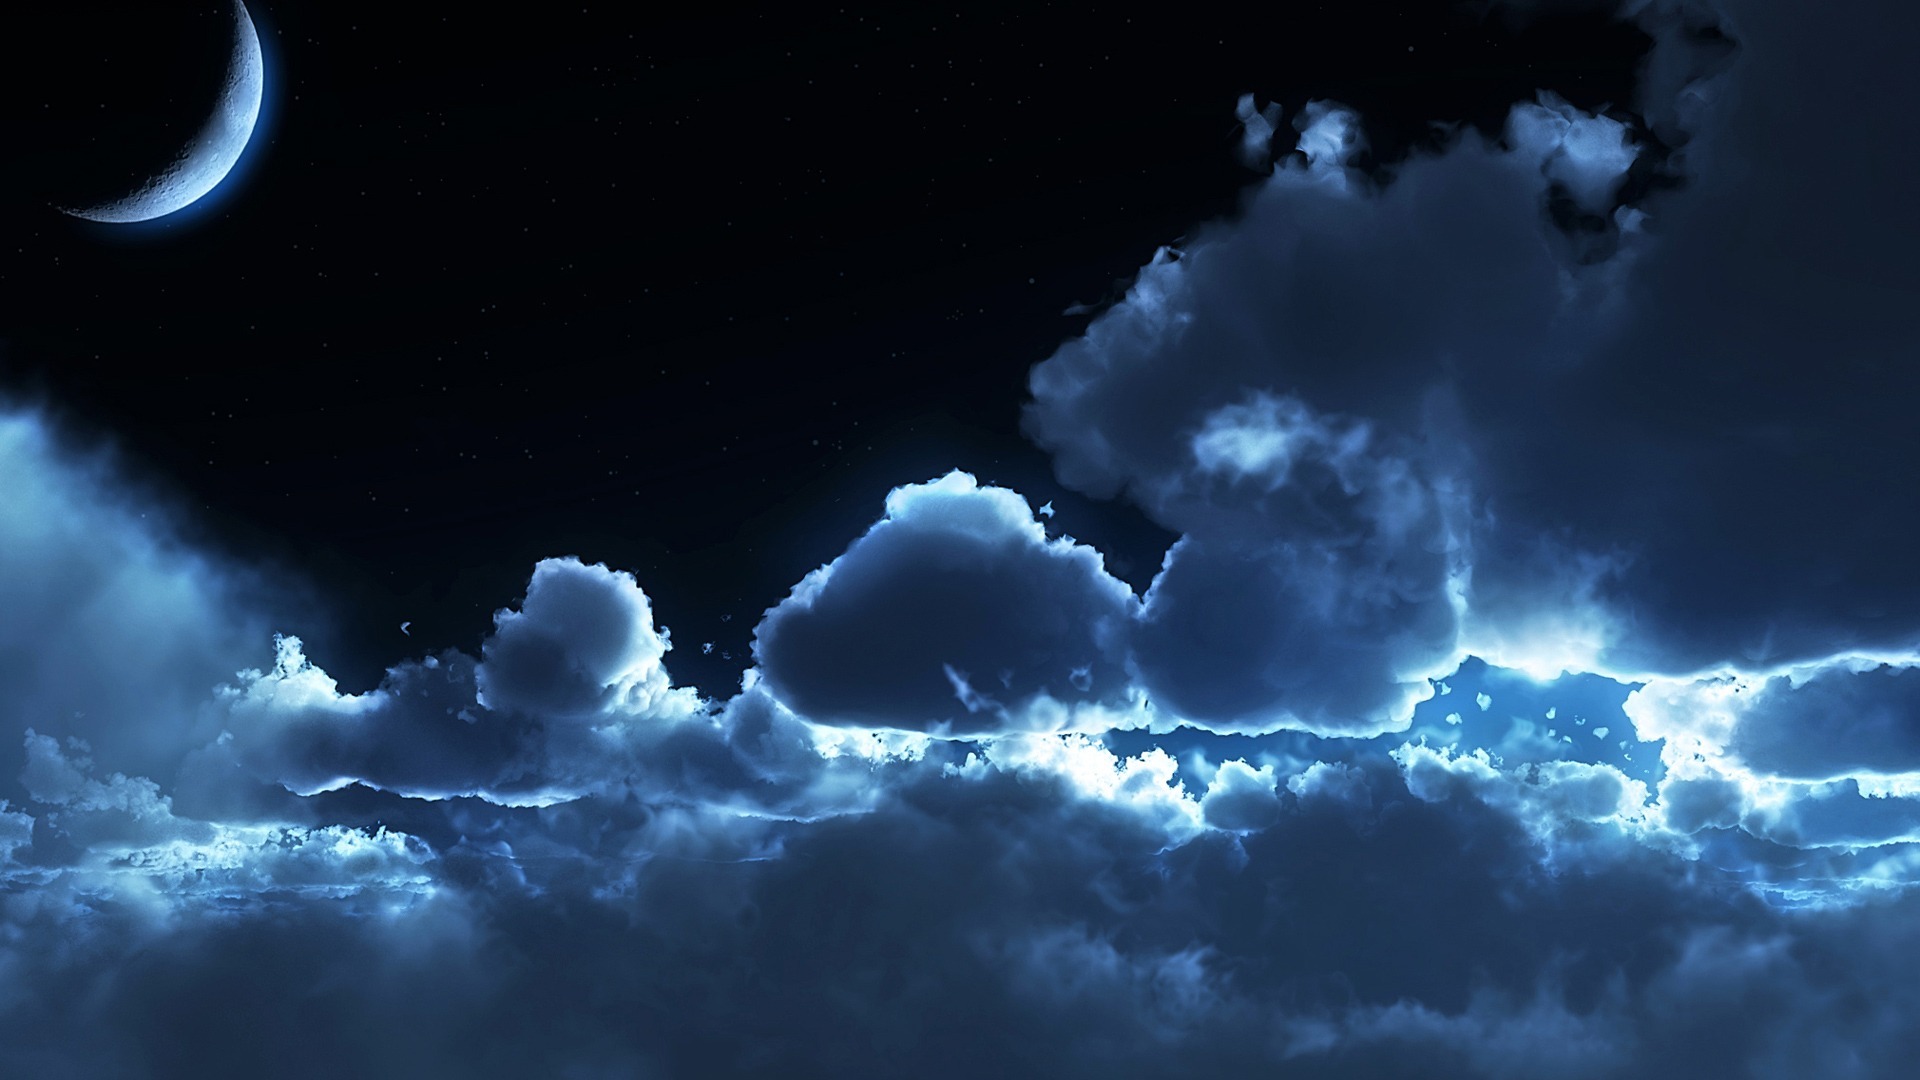 Mystical Moon And Clouds Wallpaper 19 1080 Jasmeine Moonsong